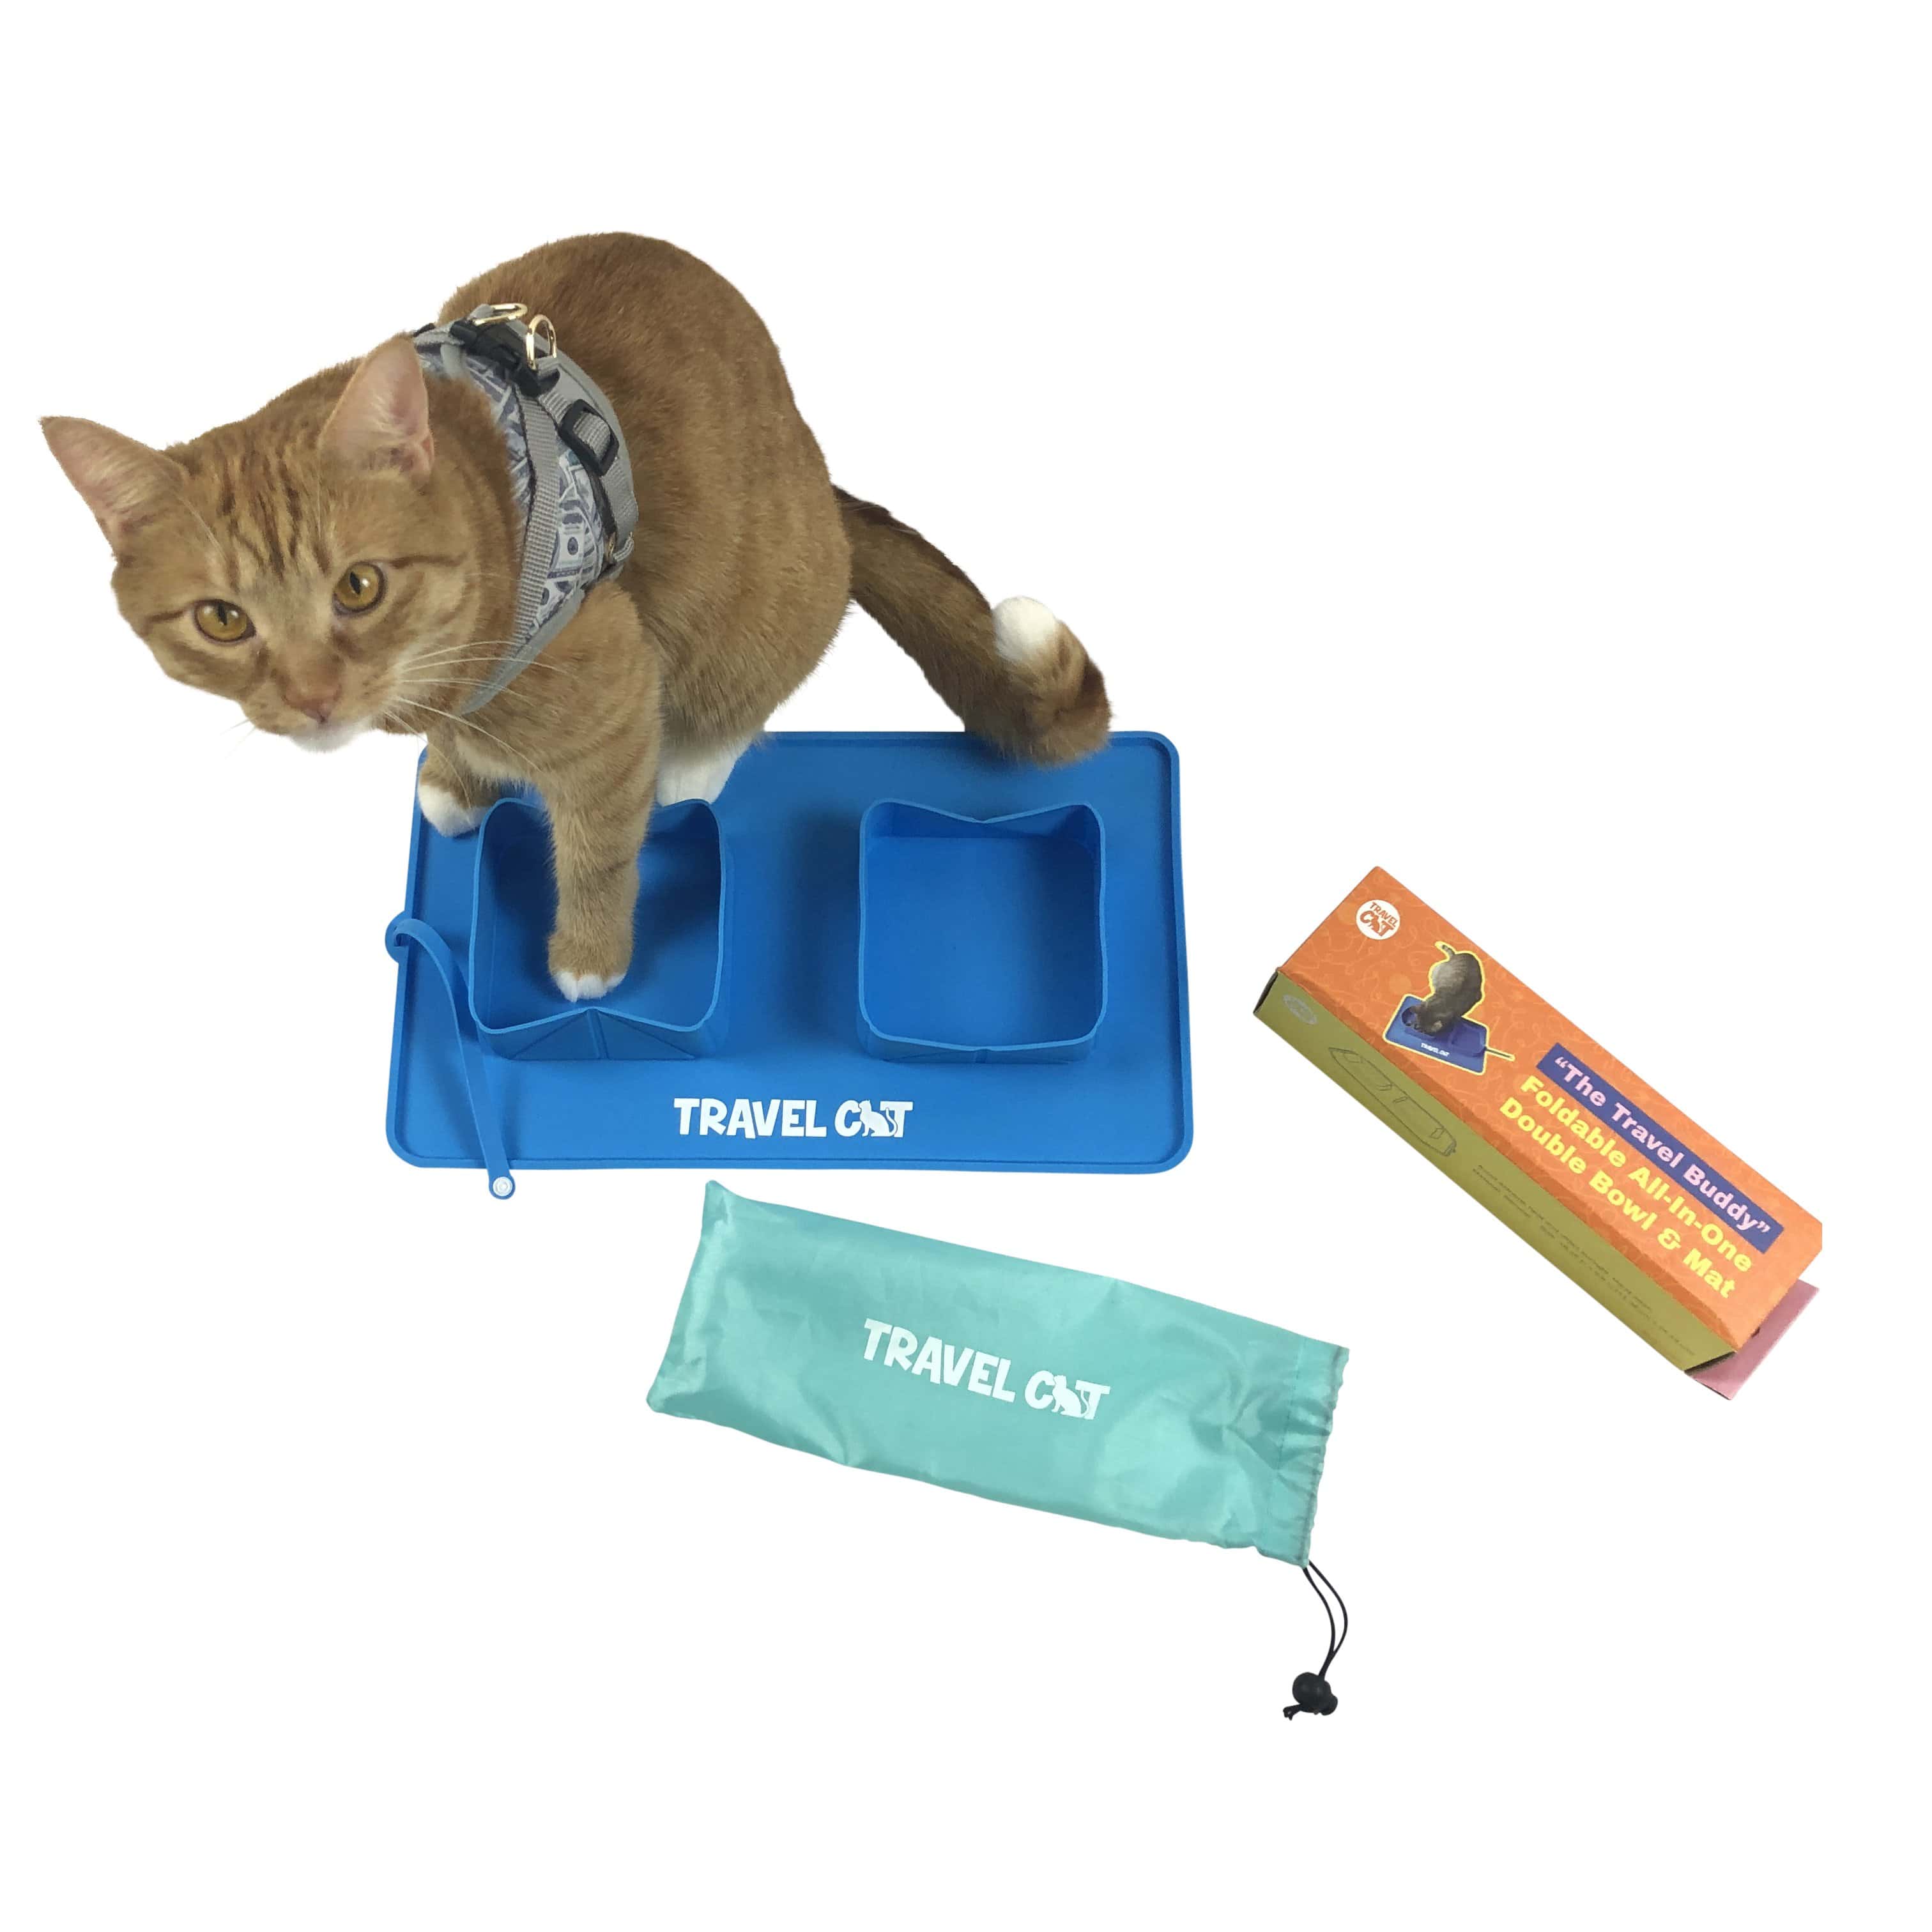 The Go Anywhere Bowl Collapsible Travel Pet Food and Water Dish for Cats / Your Cat Backpack